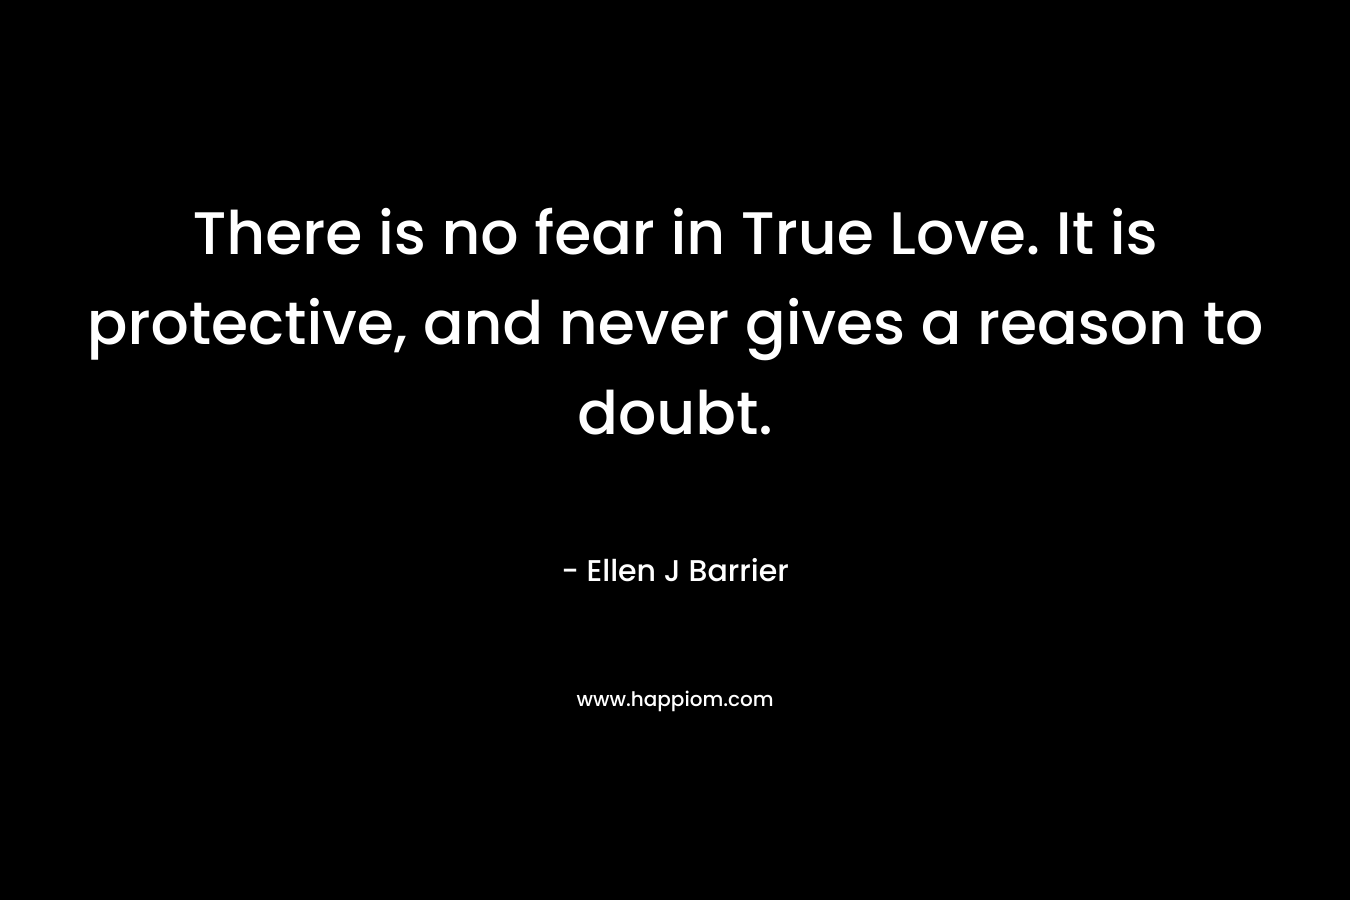 There is no fear in True Love. It is protective, and never gives a reason to doubt.